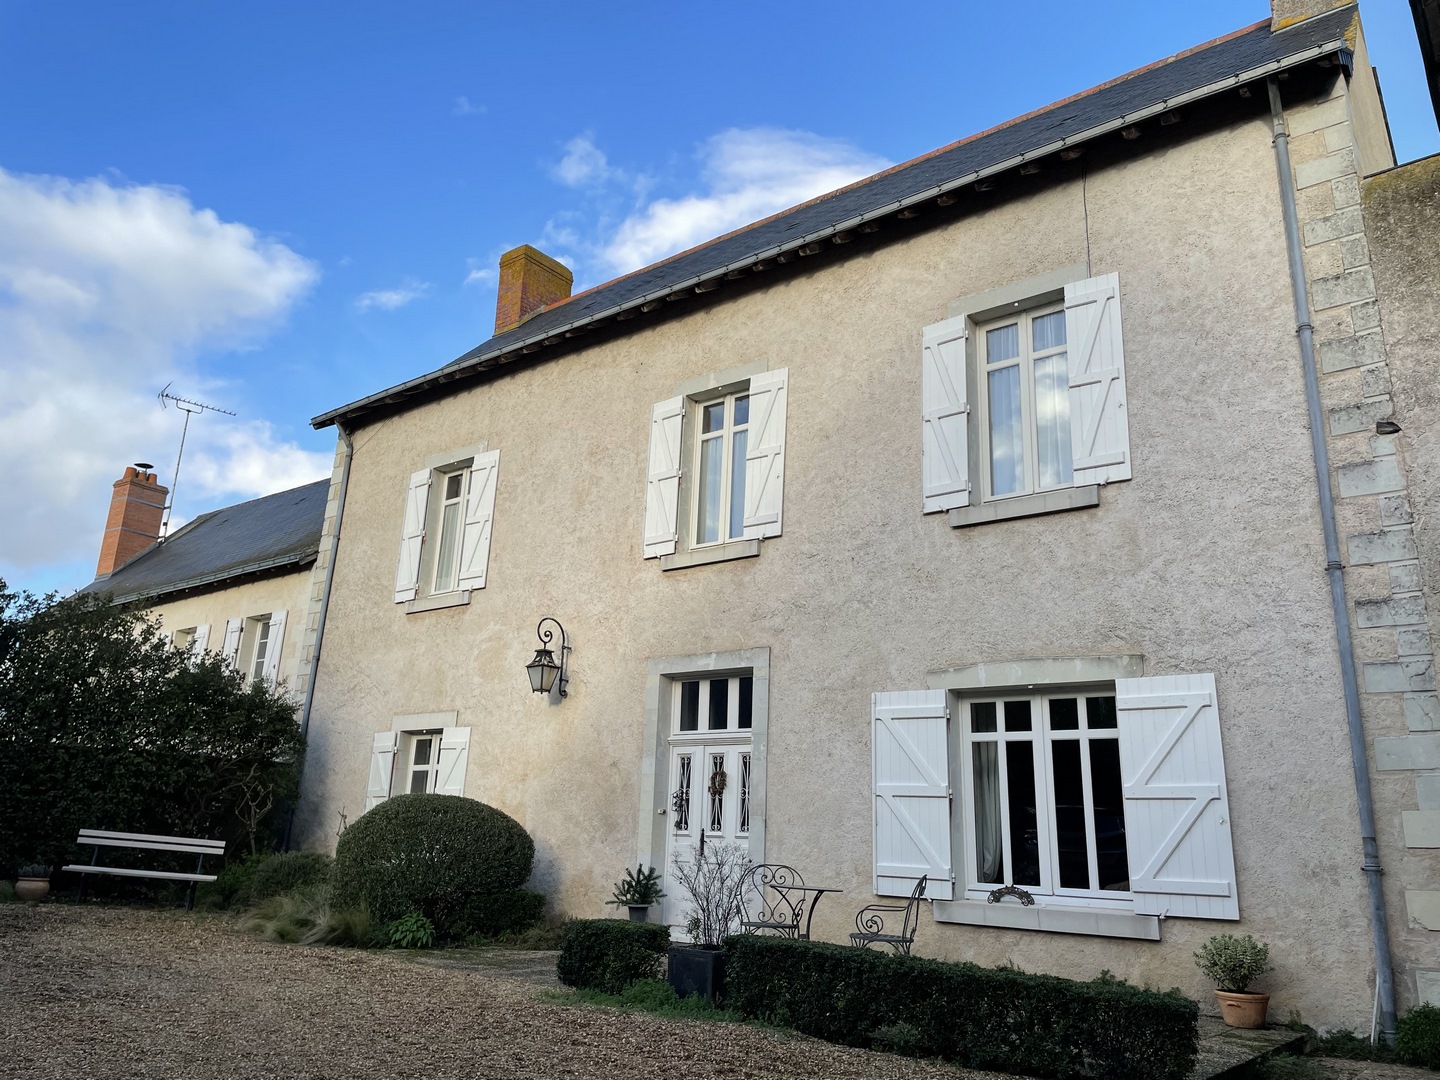 PRIORY HOUSE XVIIth and XVIIIth – 35 min ANGERS – 220m² –  OUTBUILDING – VERY NICE LANDSCAPED GARDEN – RIVER VIEW